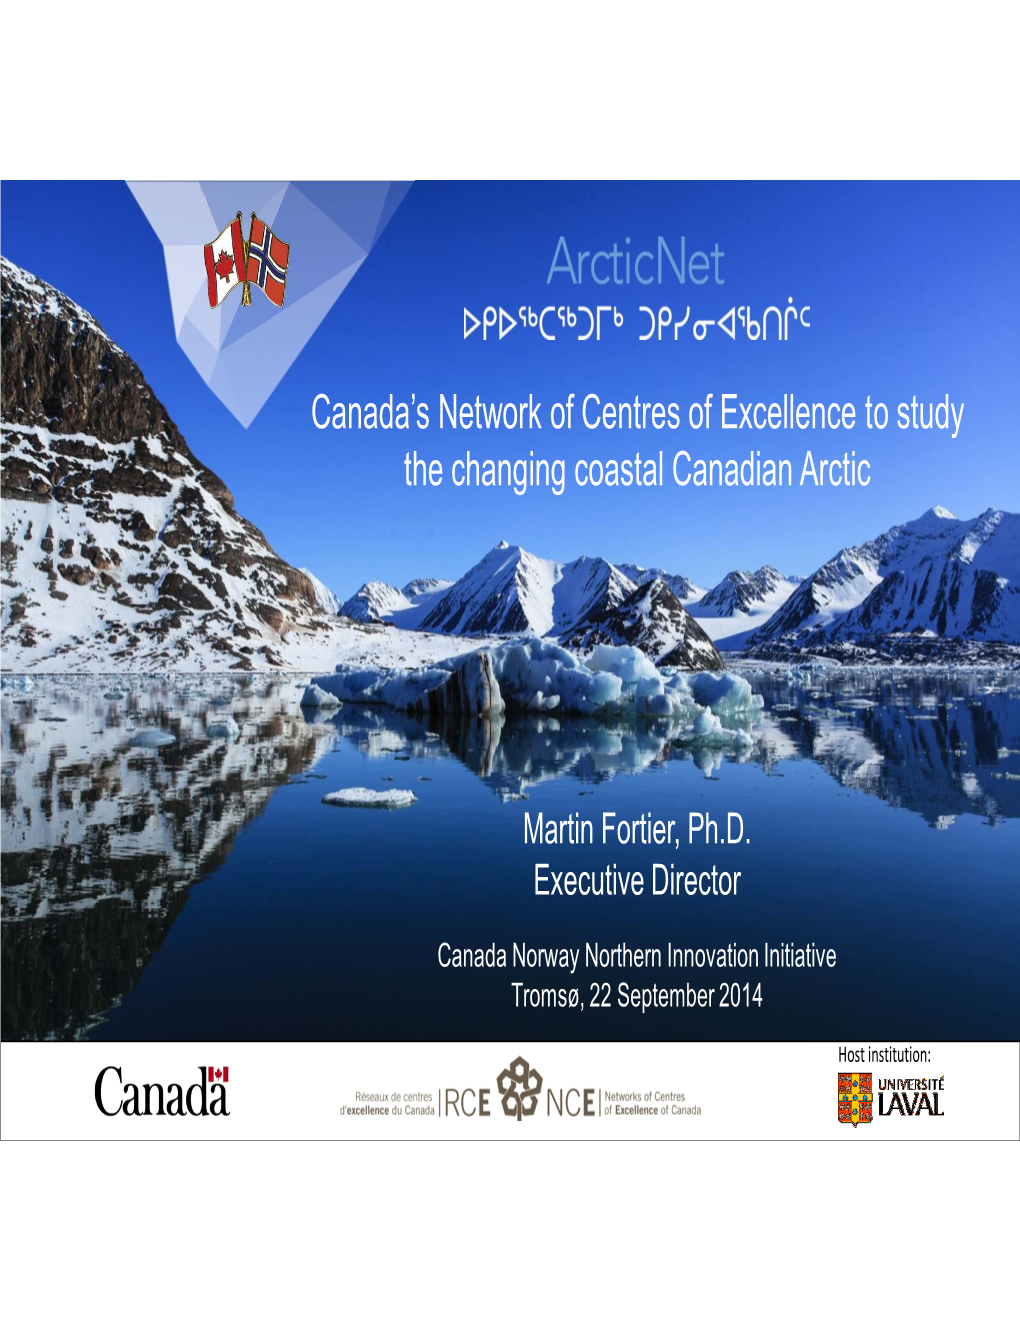 Canada's Network of Centres of Excellence to Study The